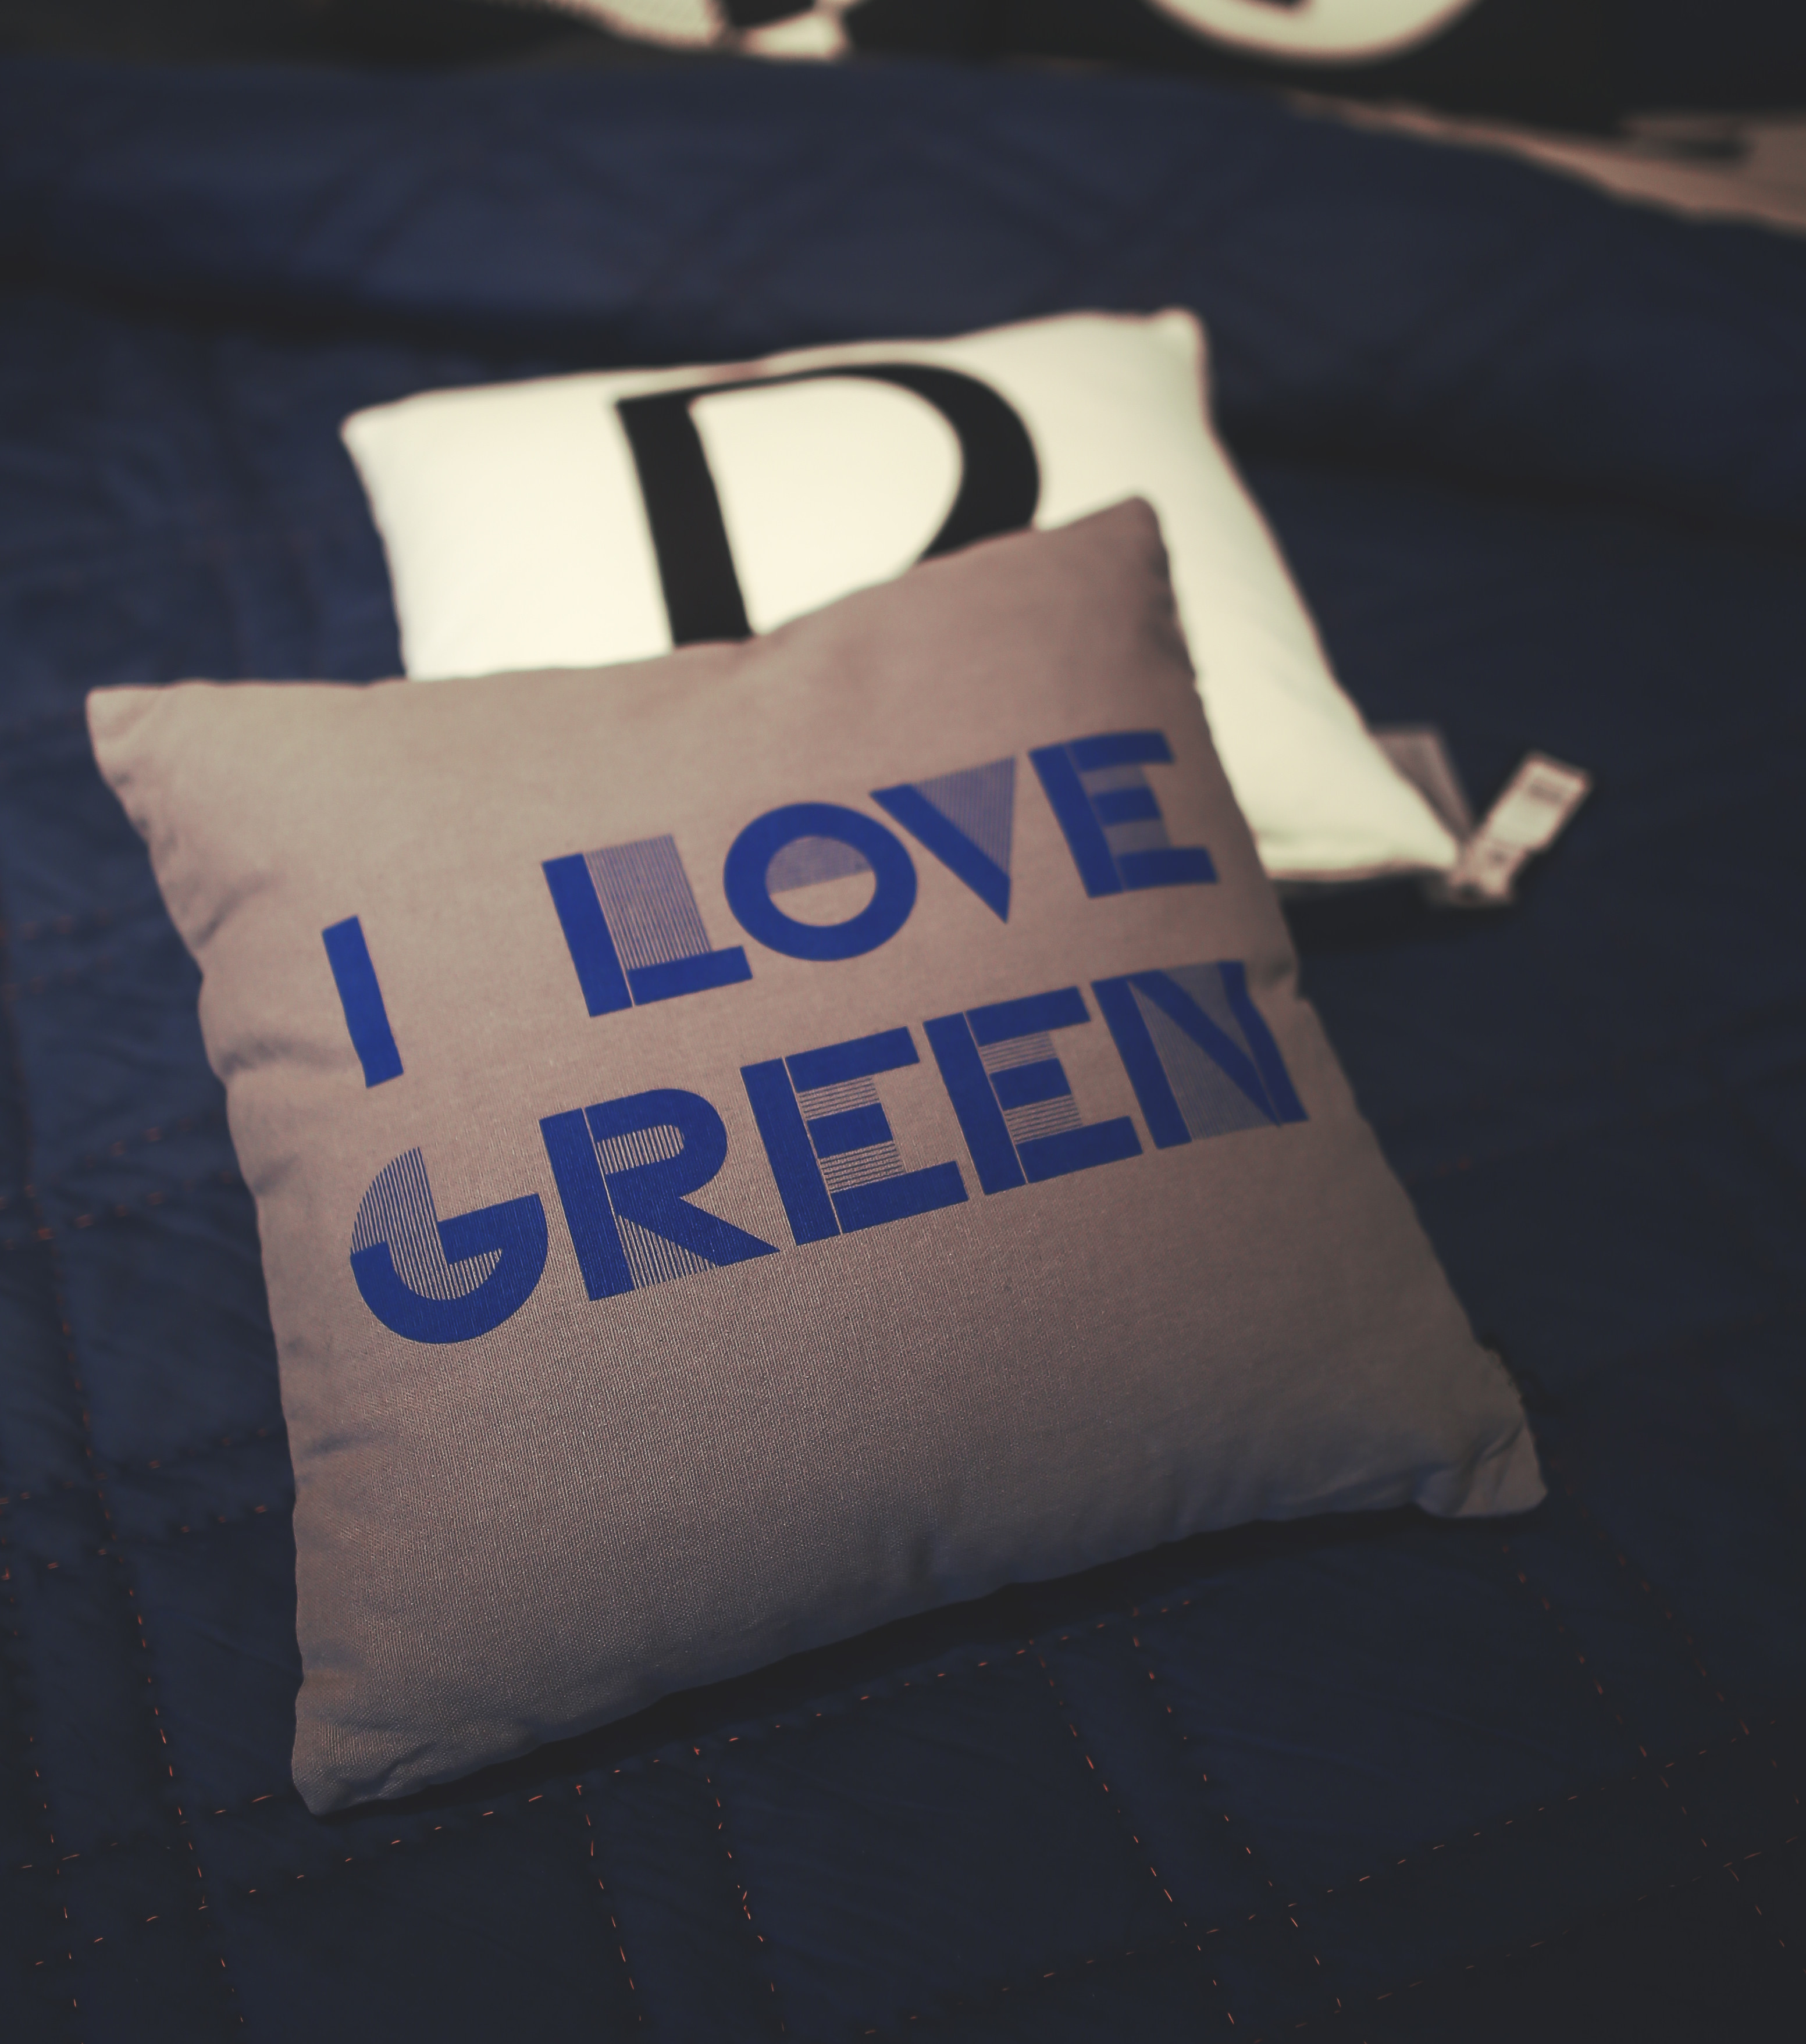 love-blue-bed-gift